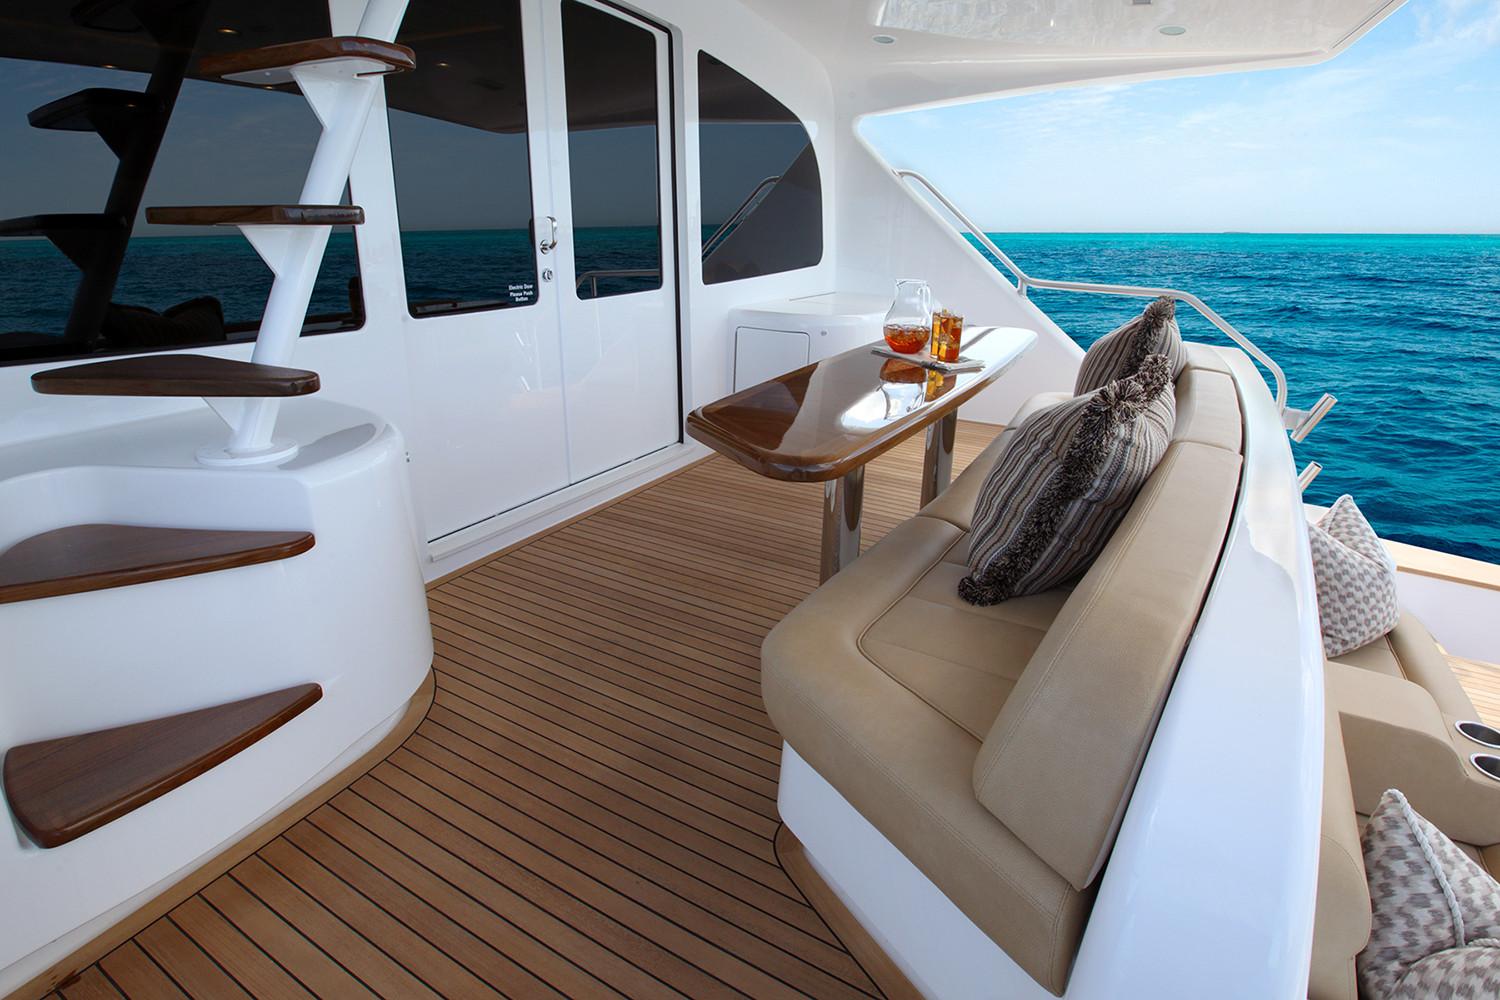 Another Day In Paradise Yacht Photos Pics Manufacturer Provided Image